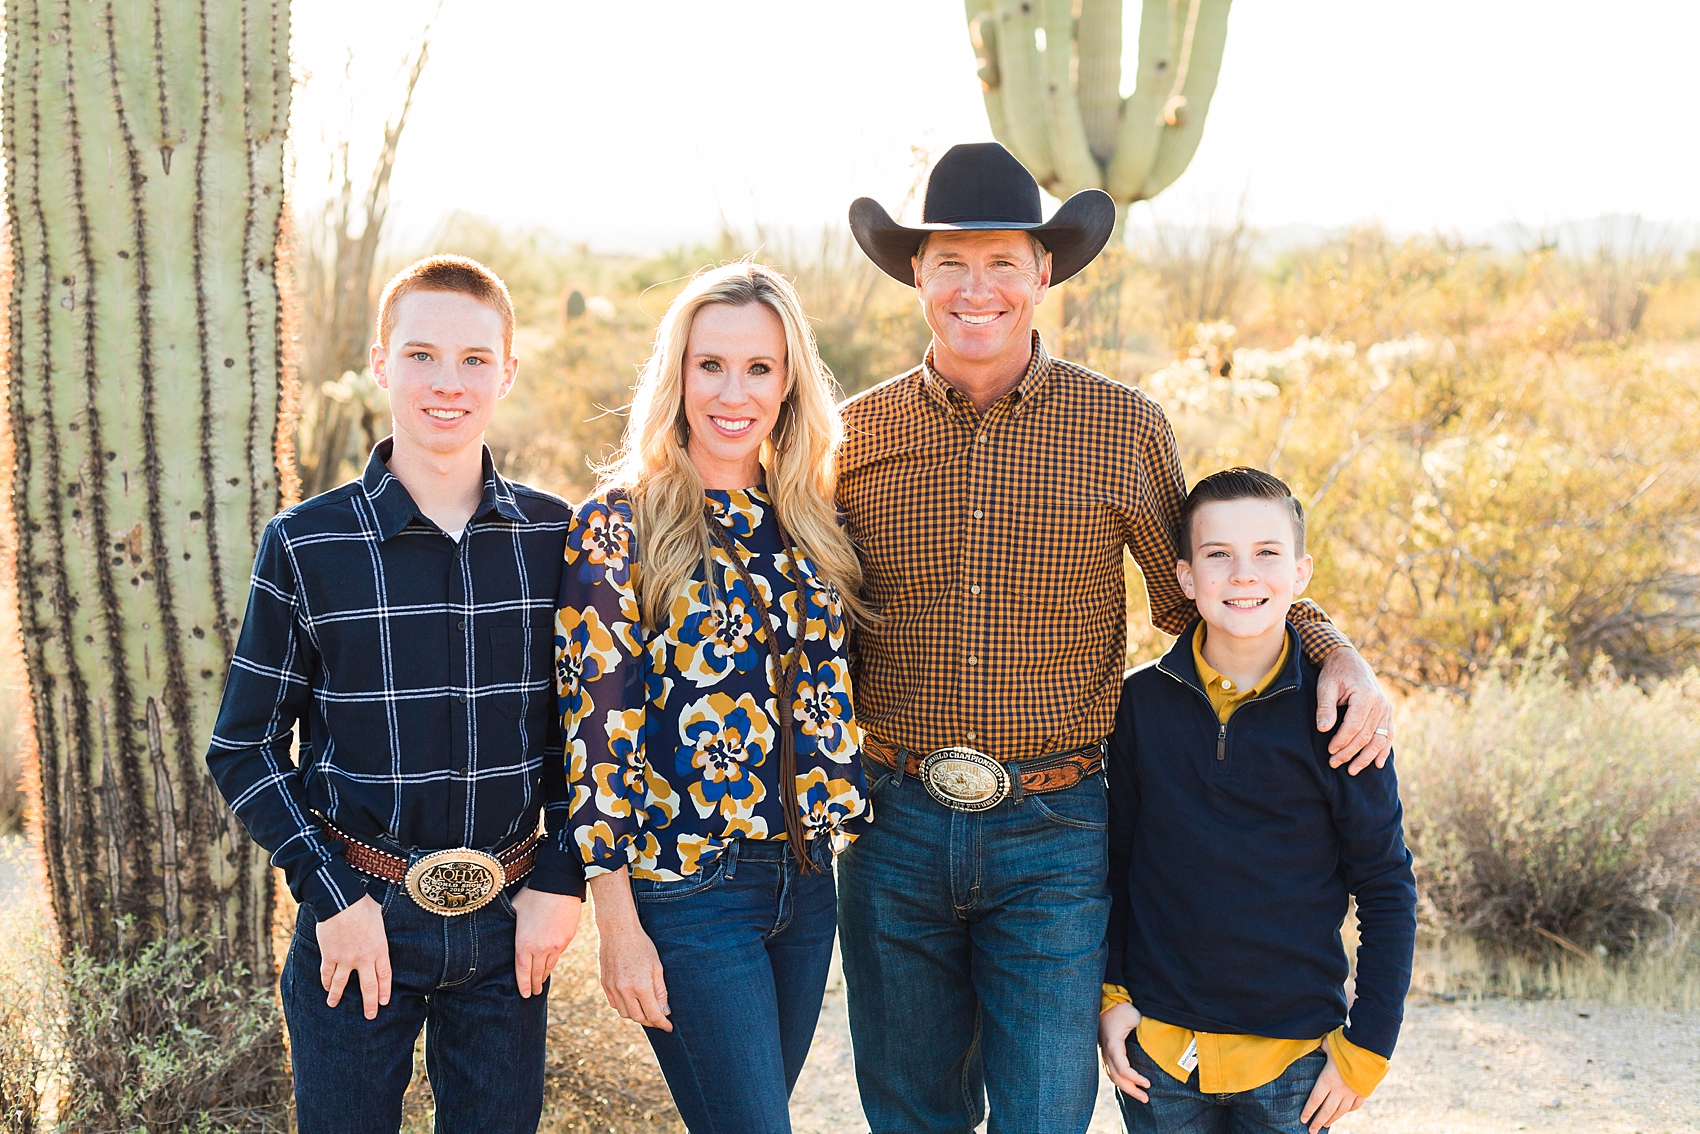 Leah Hope Photography | Scottsdale Phoenix Arizona | Desert Landscape Cactus Scenery | Cowboy Family Pictures | What to Wear | Family Poses